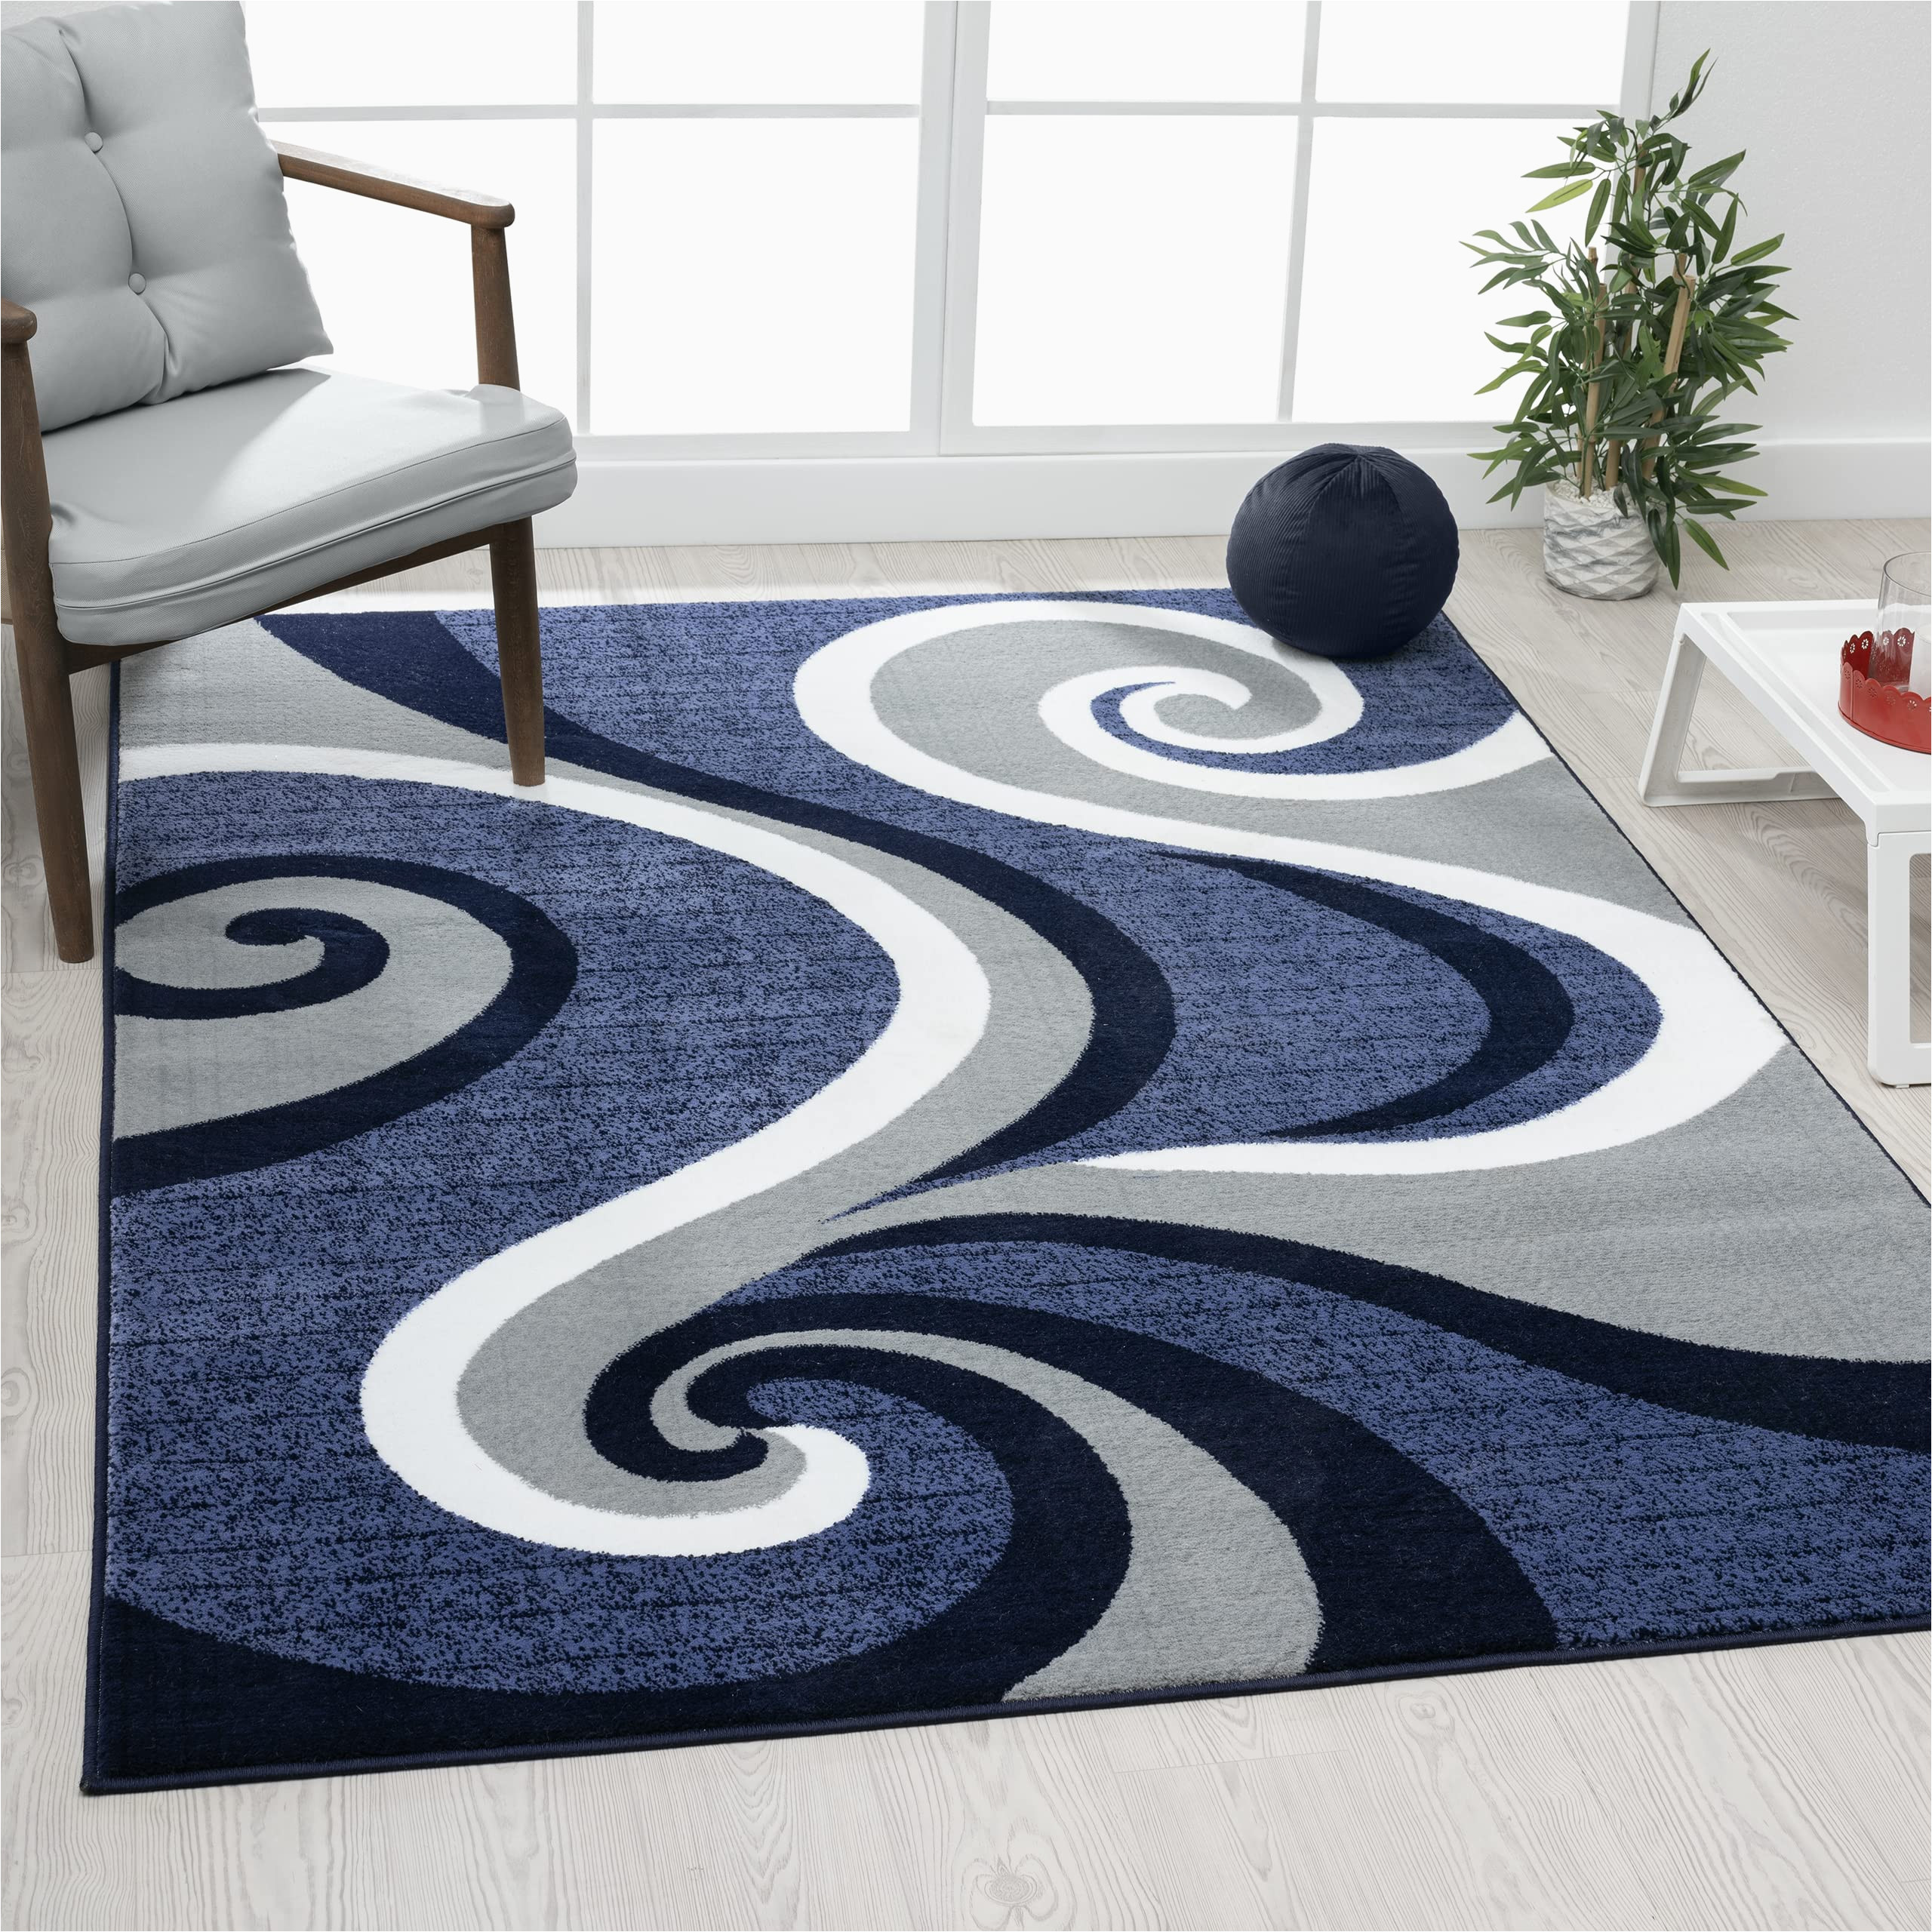 5 X 7 area Rugs On Sale 0327 Blue White Gray 5 X 7 area Rug Abstract Carpet by Persian-rugs